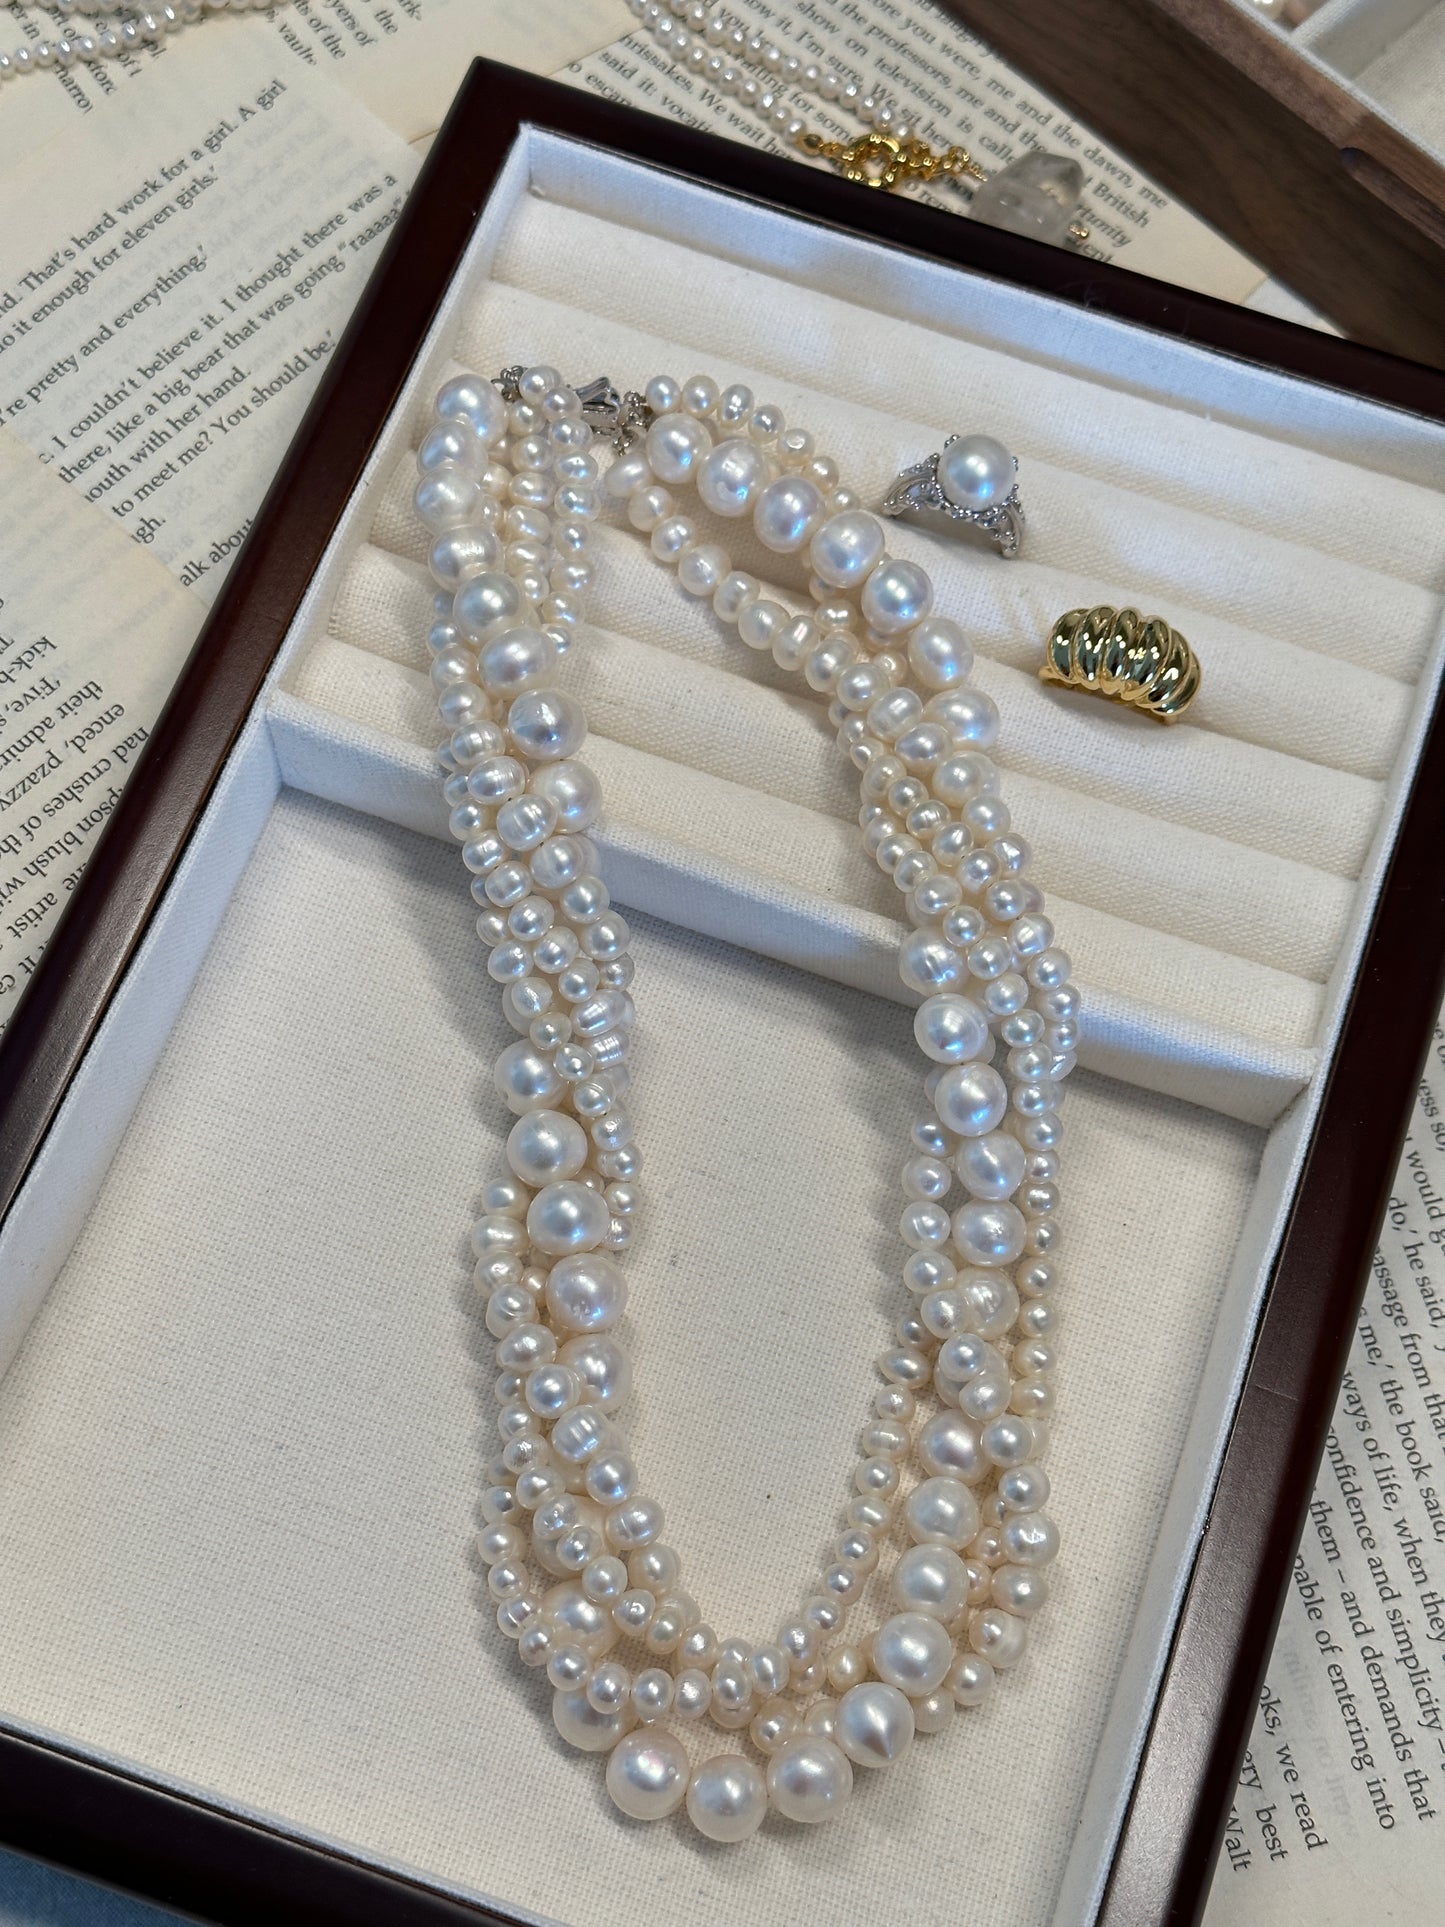 European Pearl Symphony Necklace